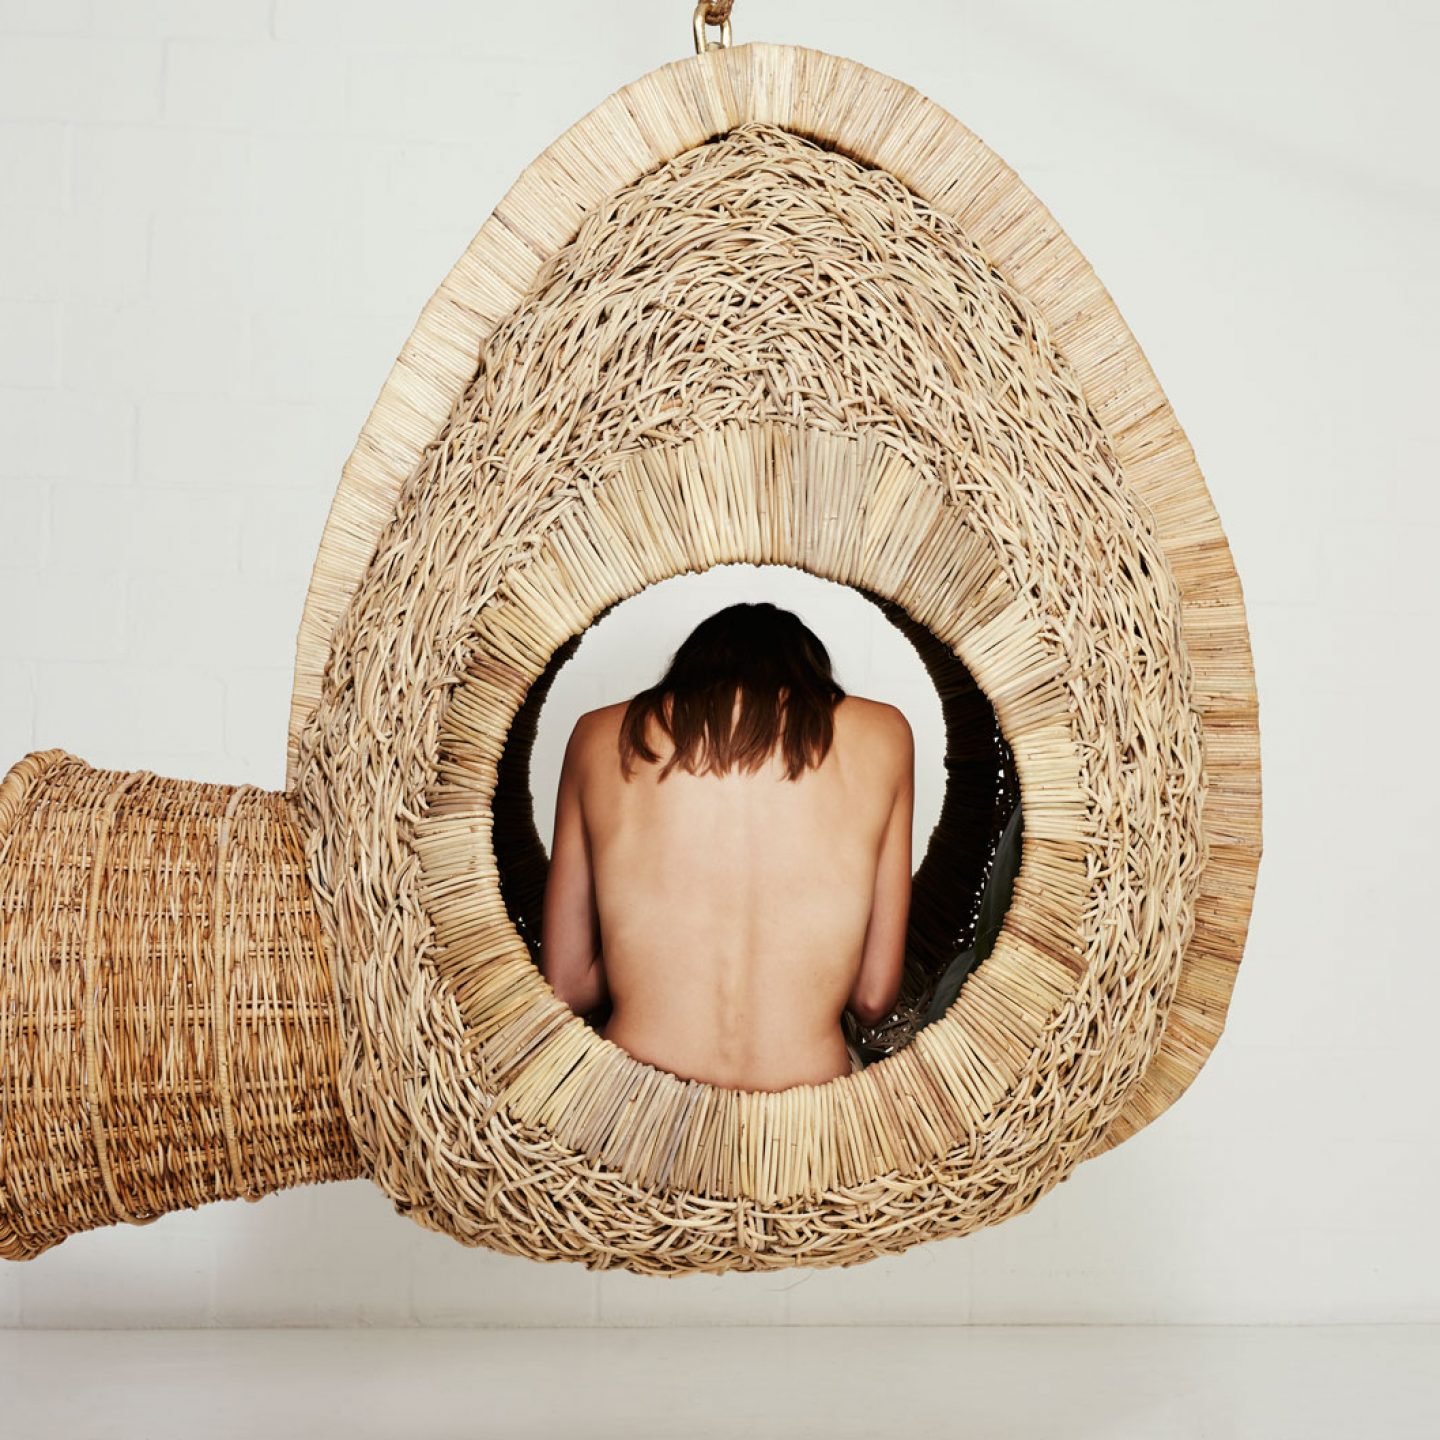 ignant_design_Suspended-Sofas-Cocoons-and-Nests-by-Porky-Hefer_003